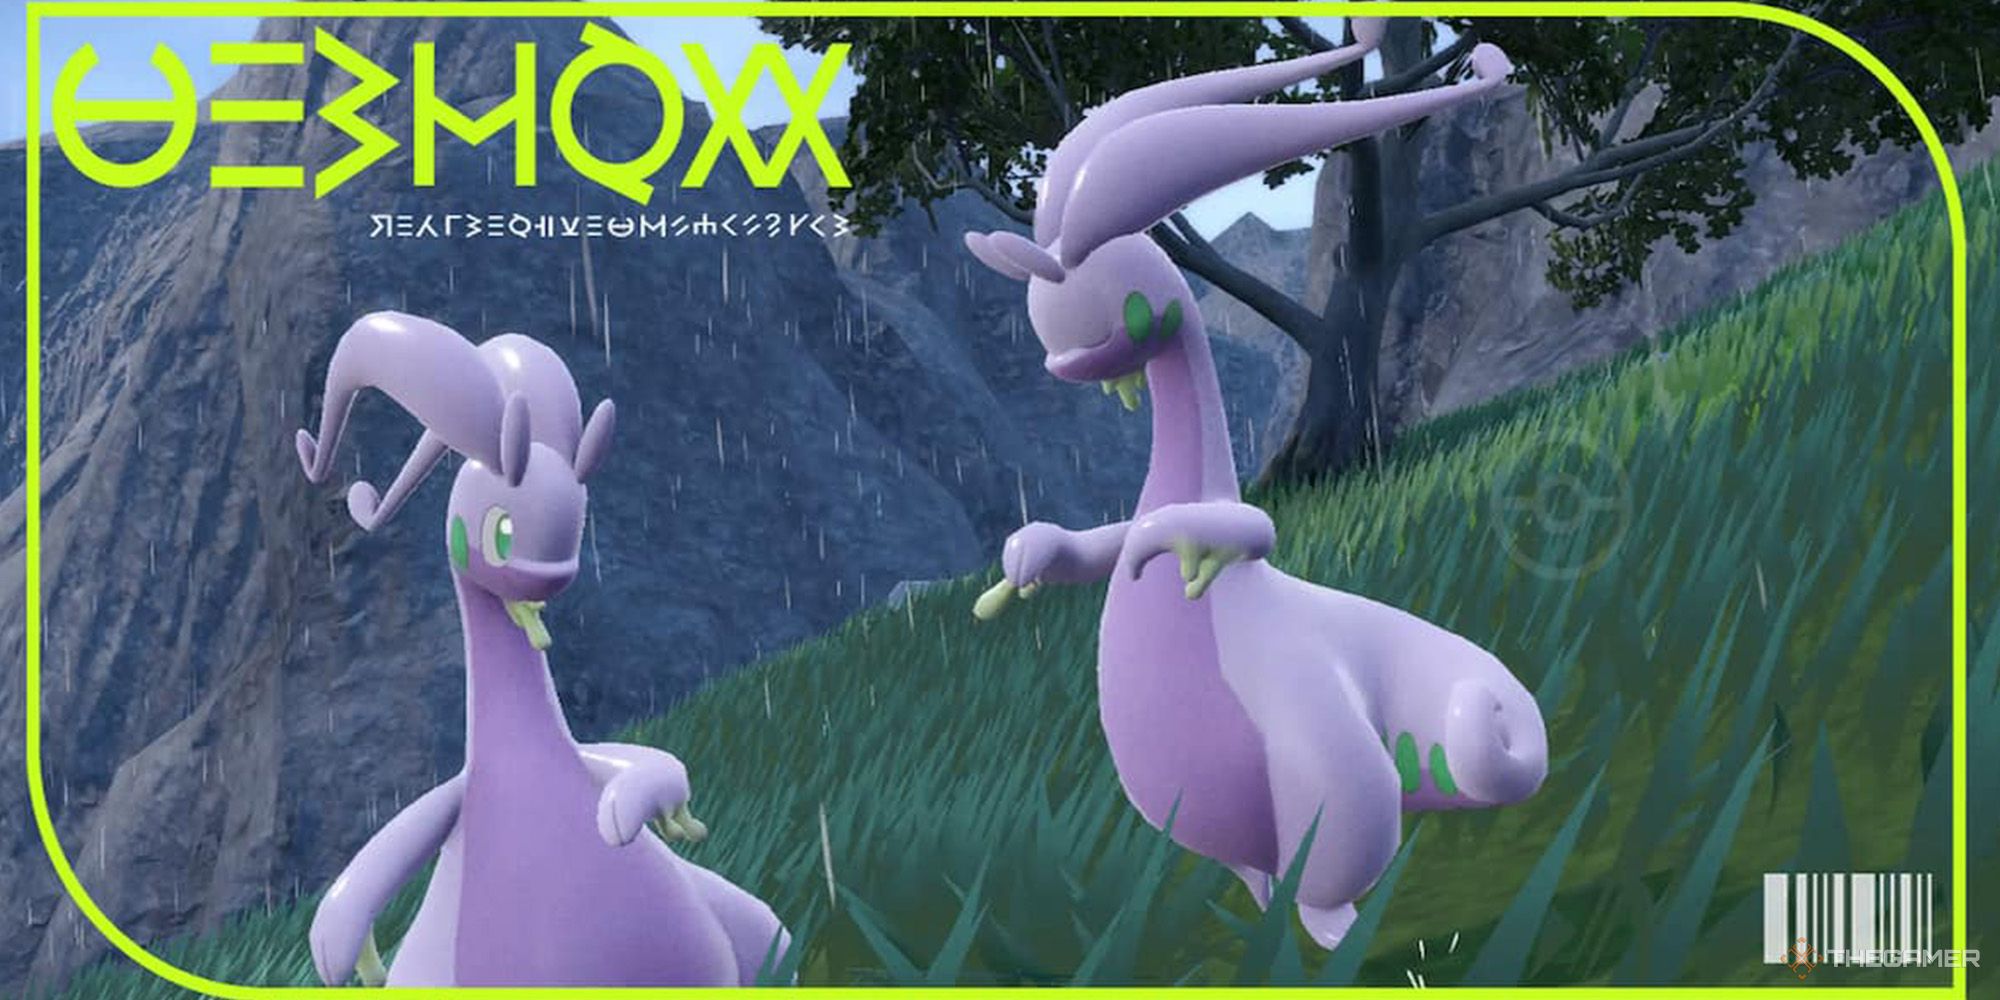 Goodra's Pokedex entry shows two of the Pokemon in a wooded environment, overshadowed by a mountain.